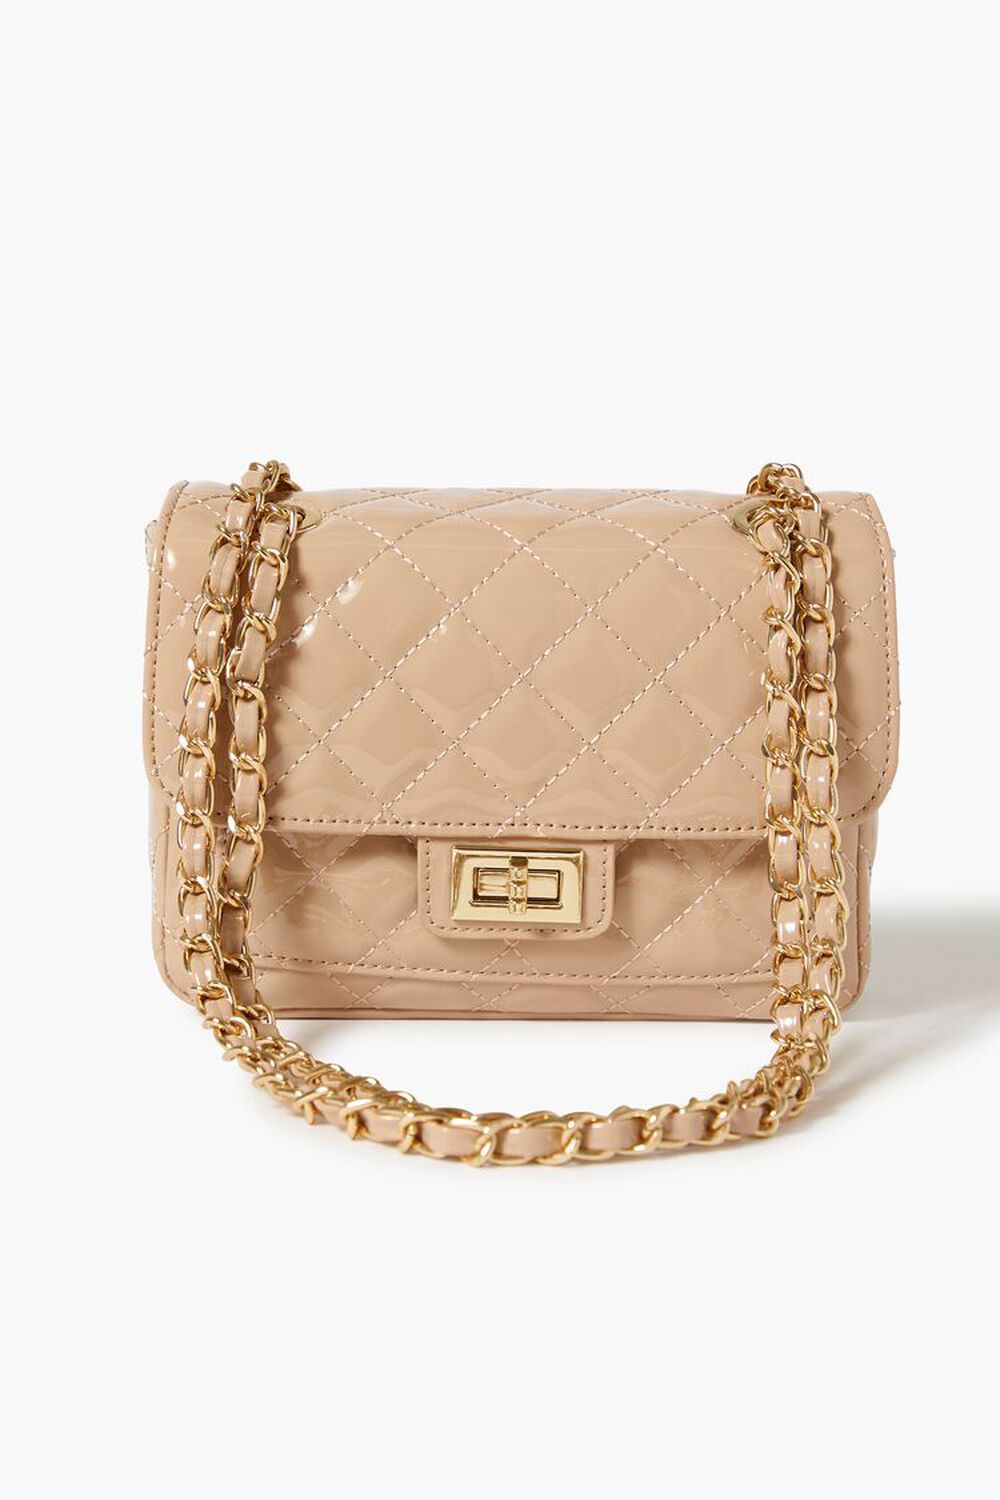 Chanel Purse Tan Quilted Beauty Lock Bag Chain Strap Shoulder Flap Crossbody